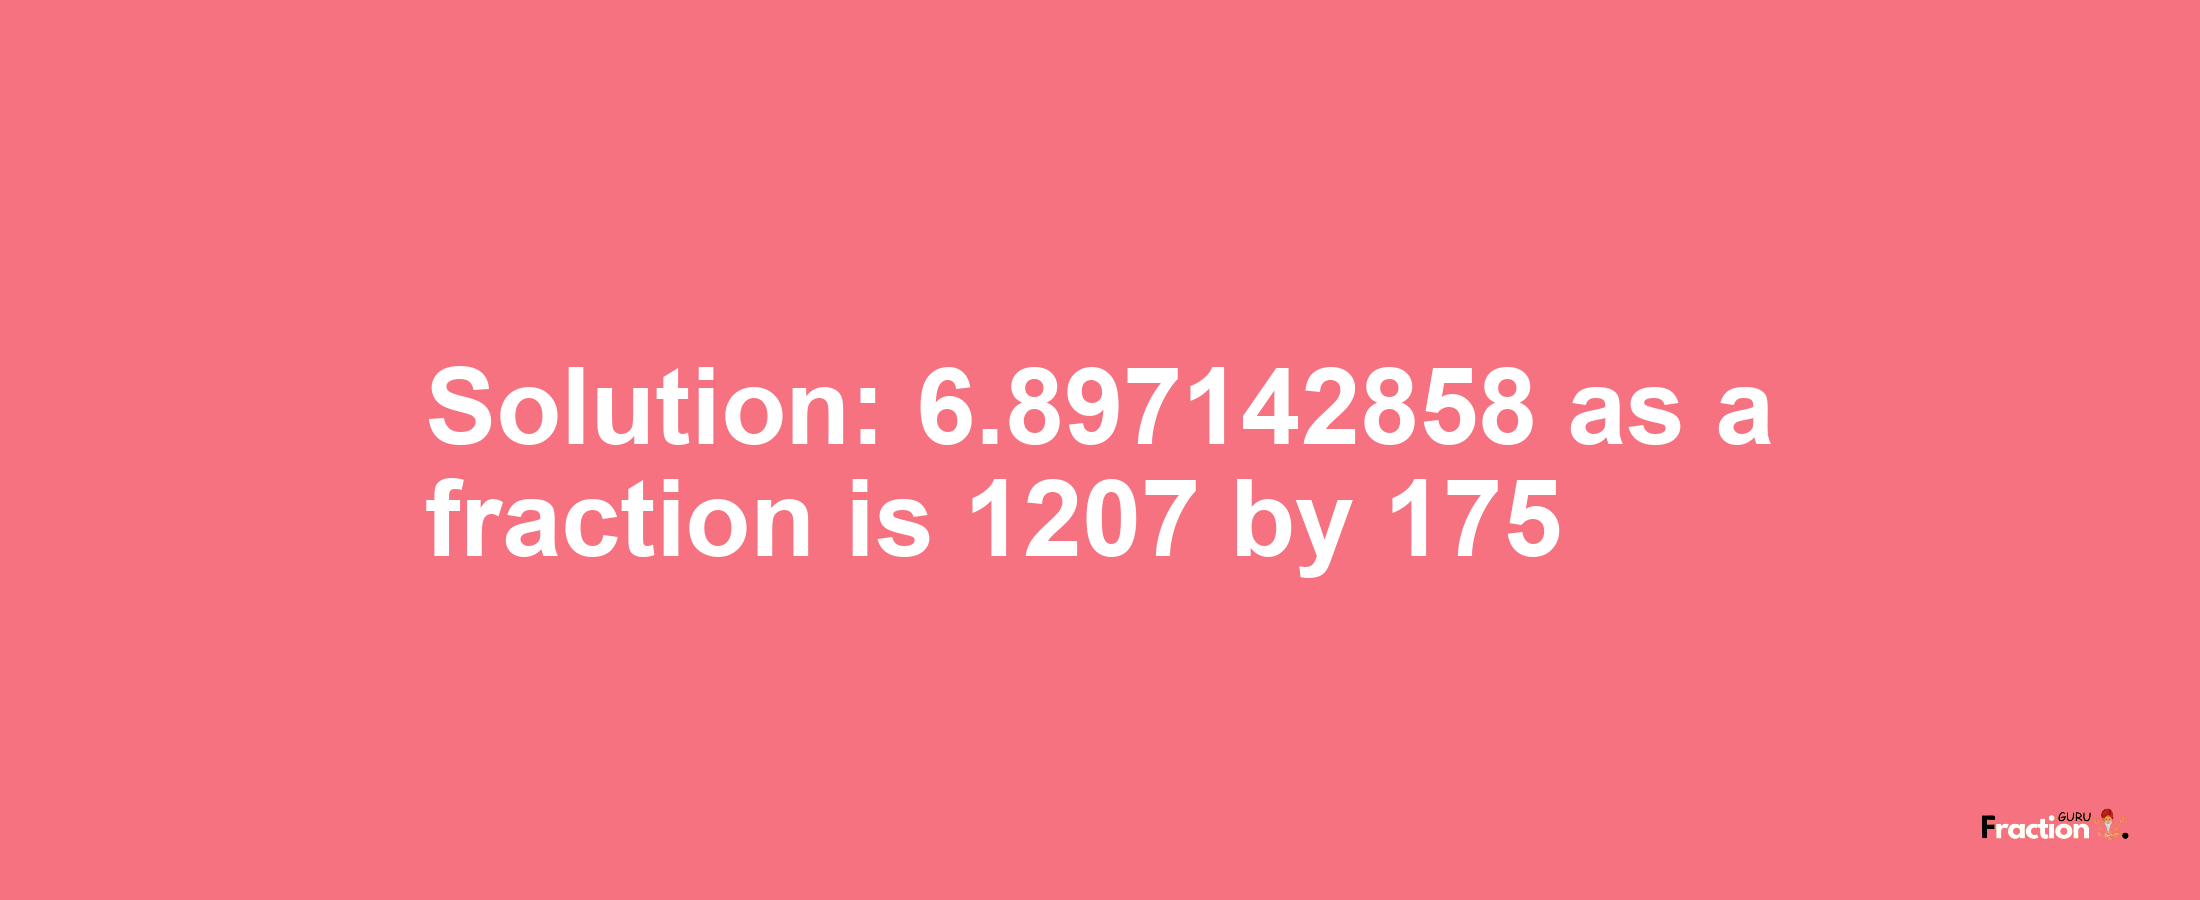 Solution:6.897142858 as a fraction is 1207/175